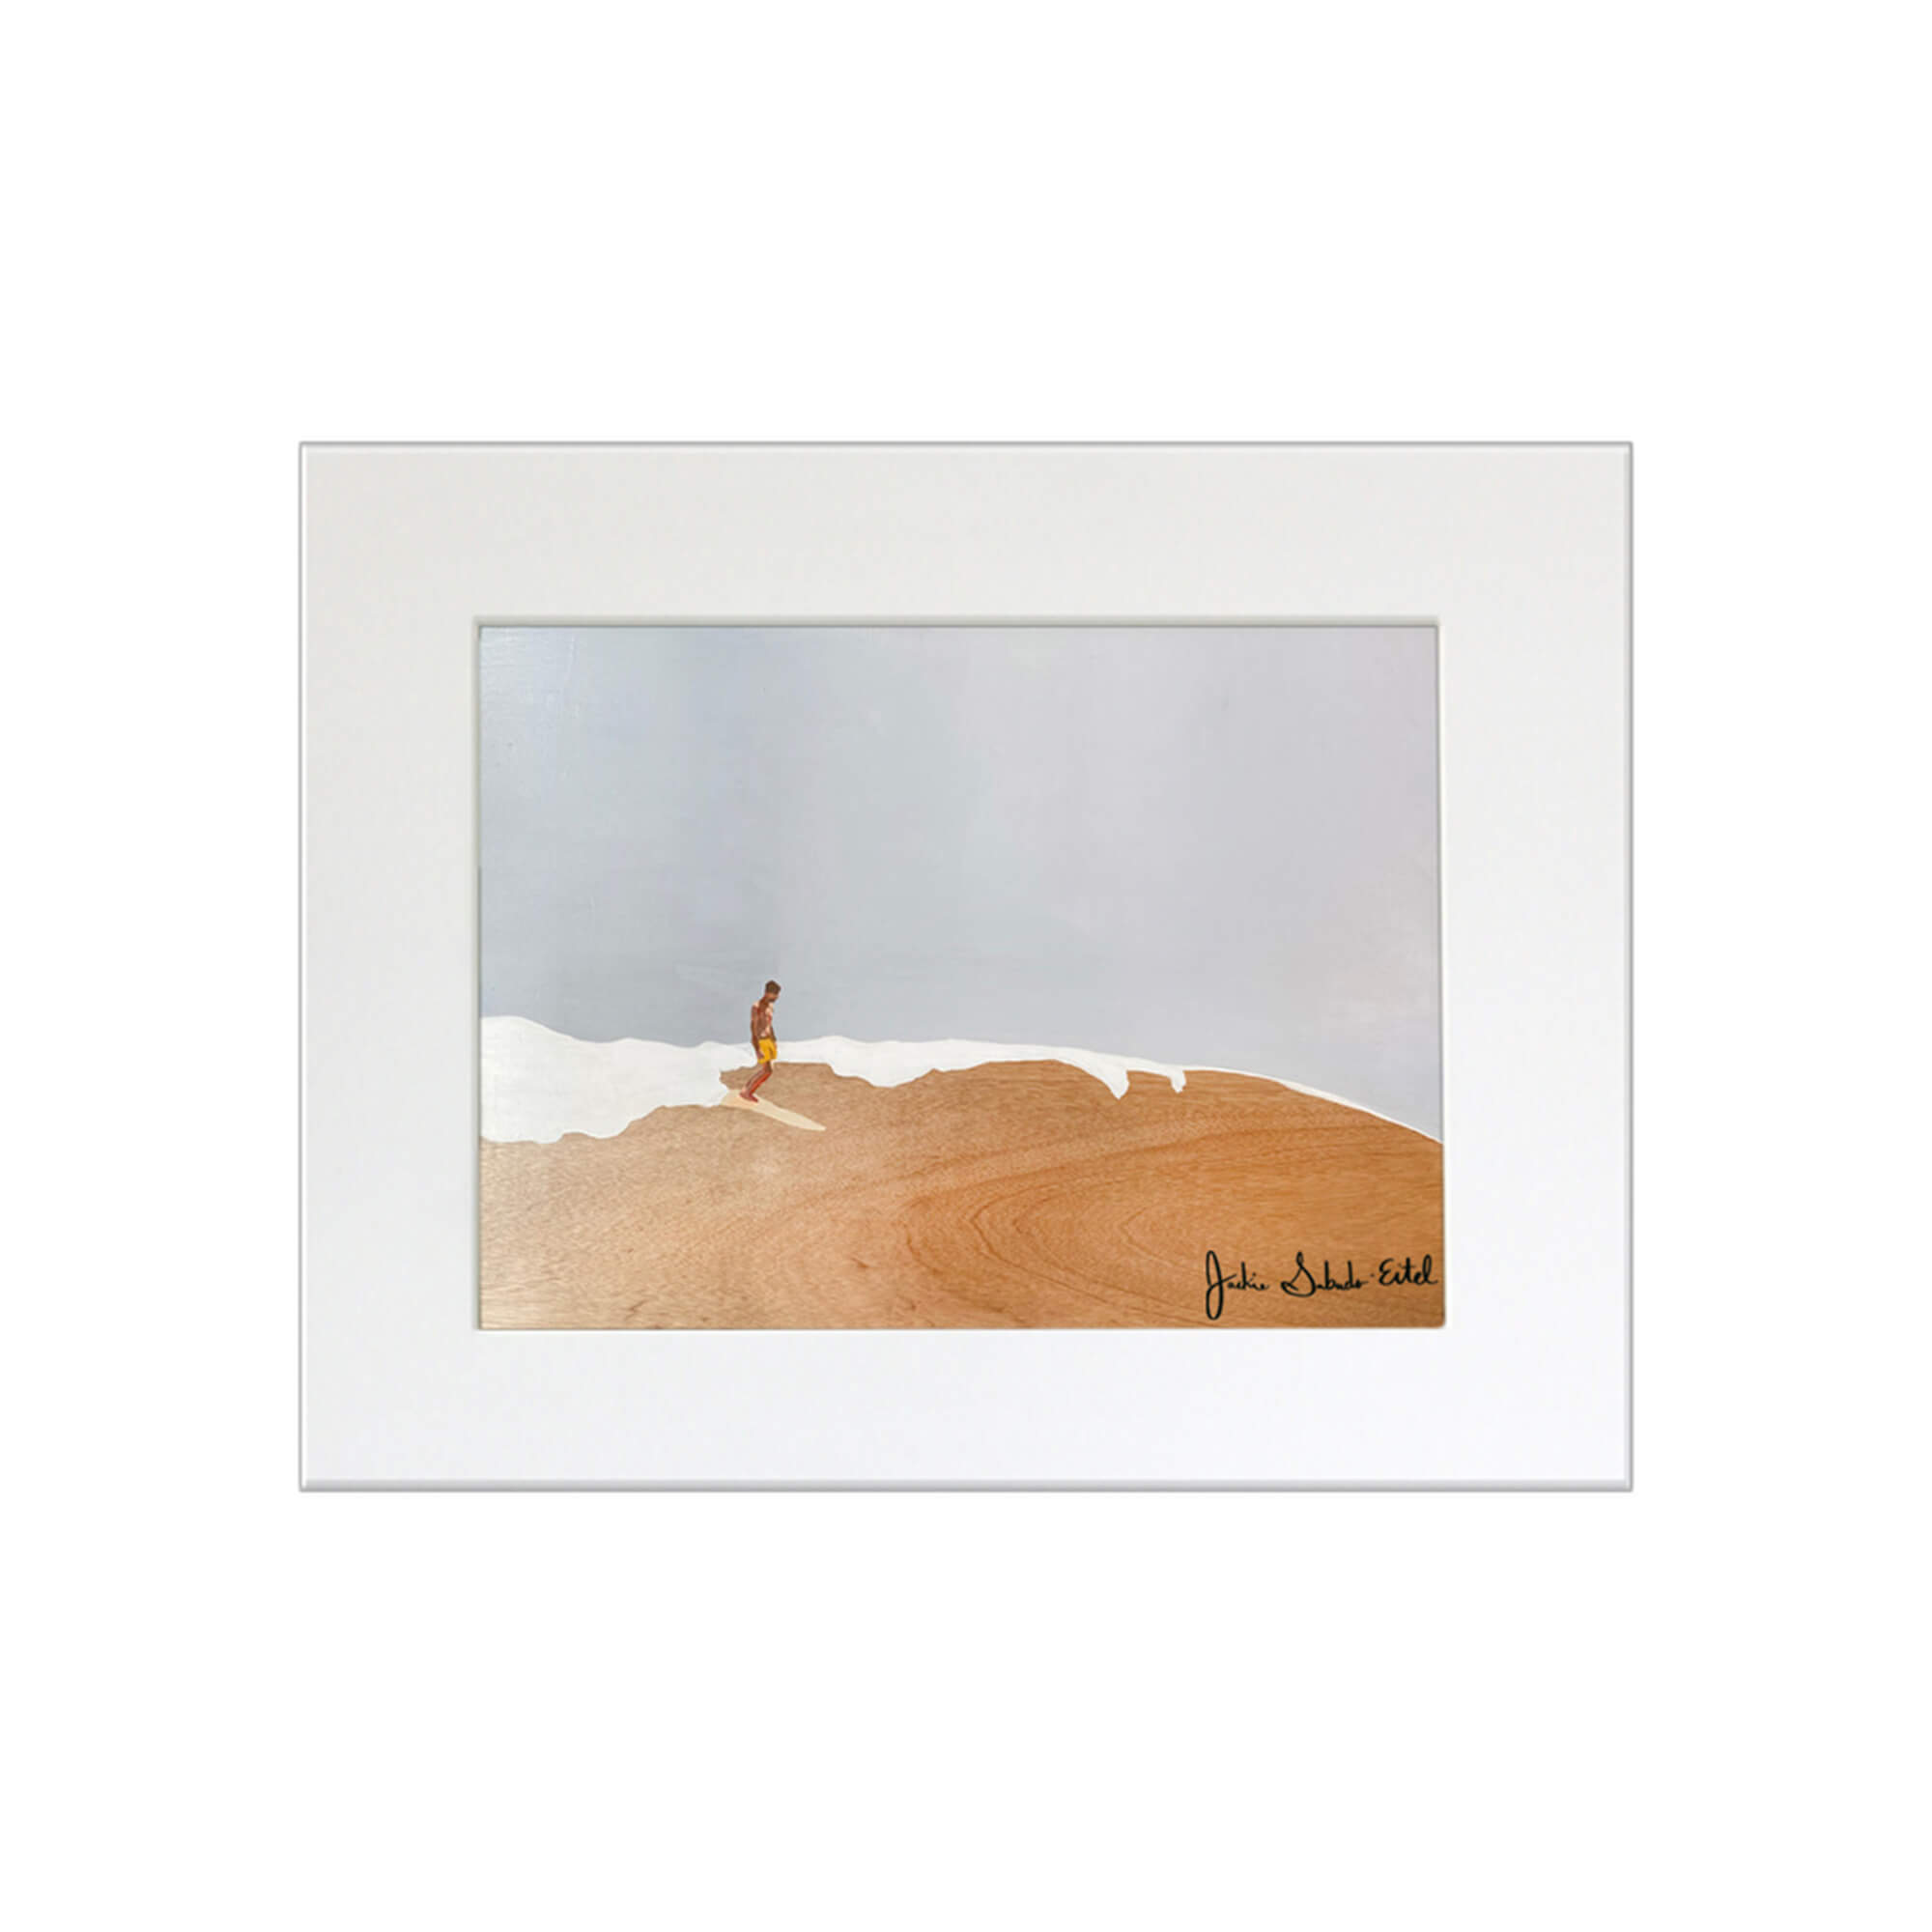 A matted art print featuring a man peacefully riding the epic waves of Hawaii by Hawaii artist Jackie Eitel